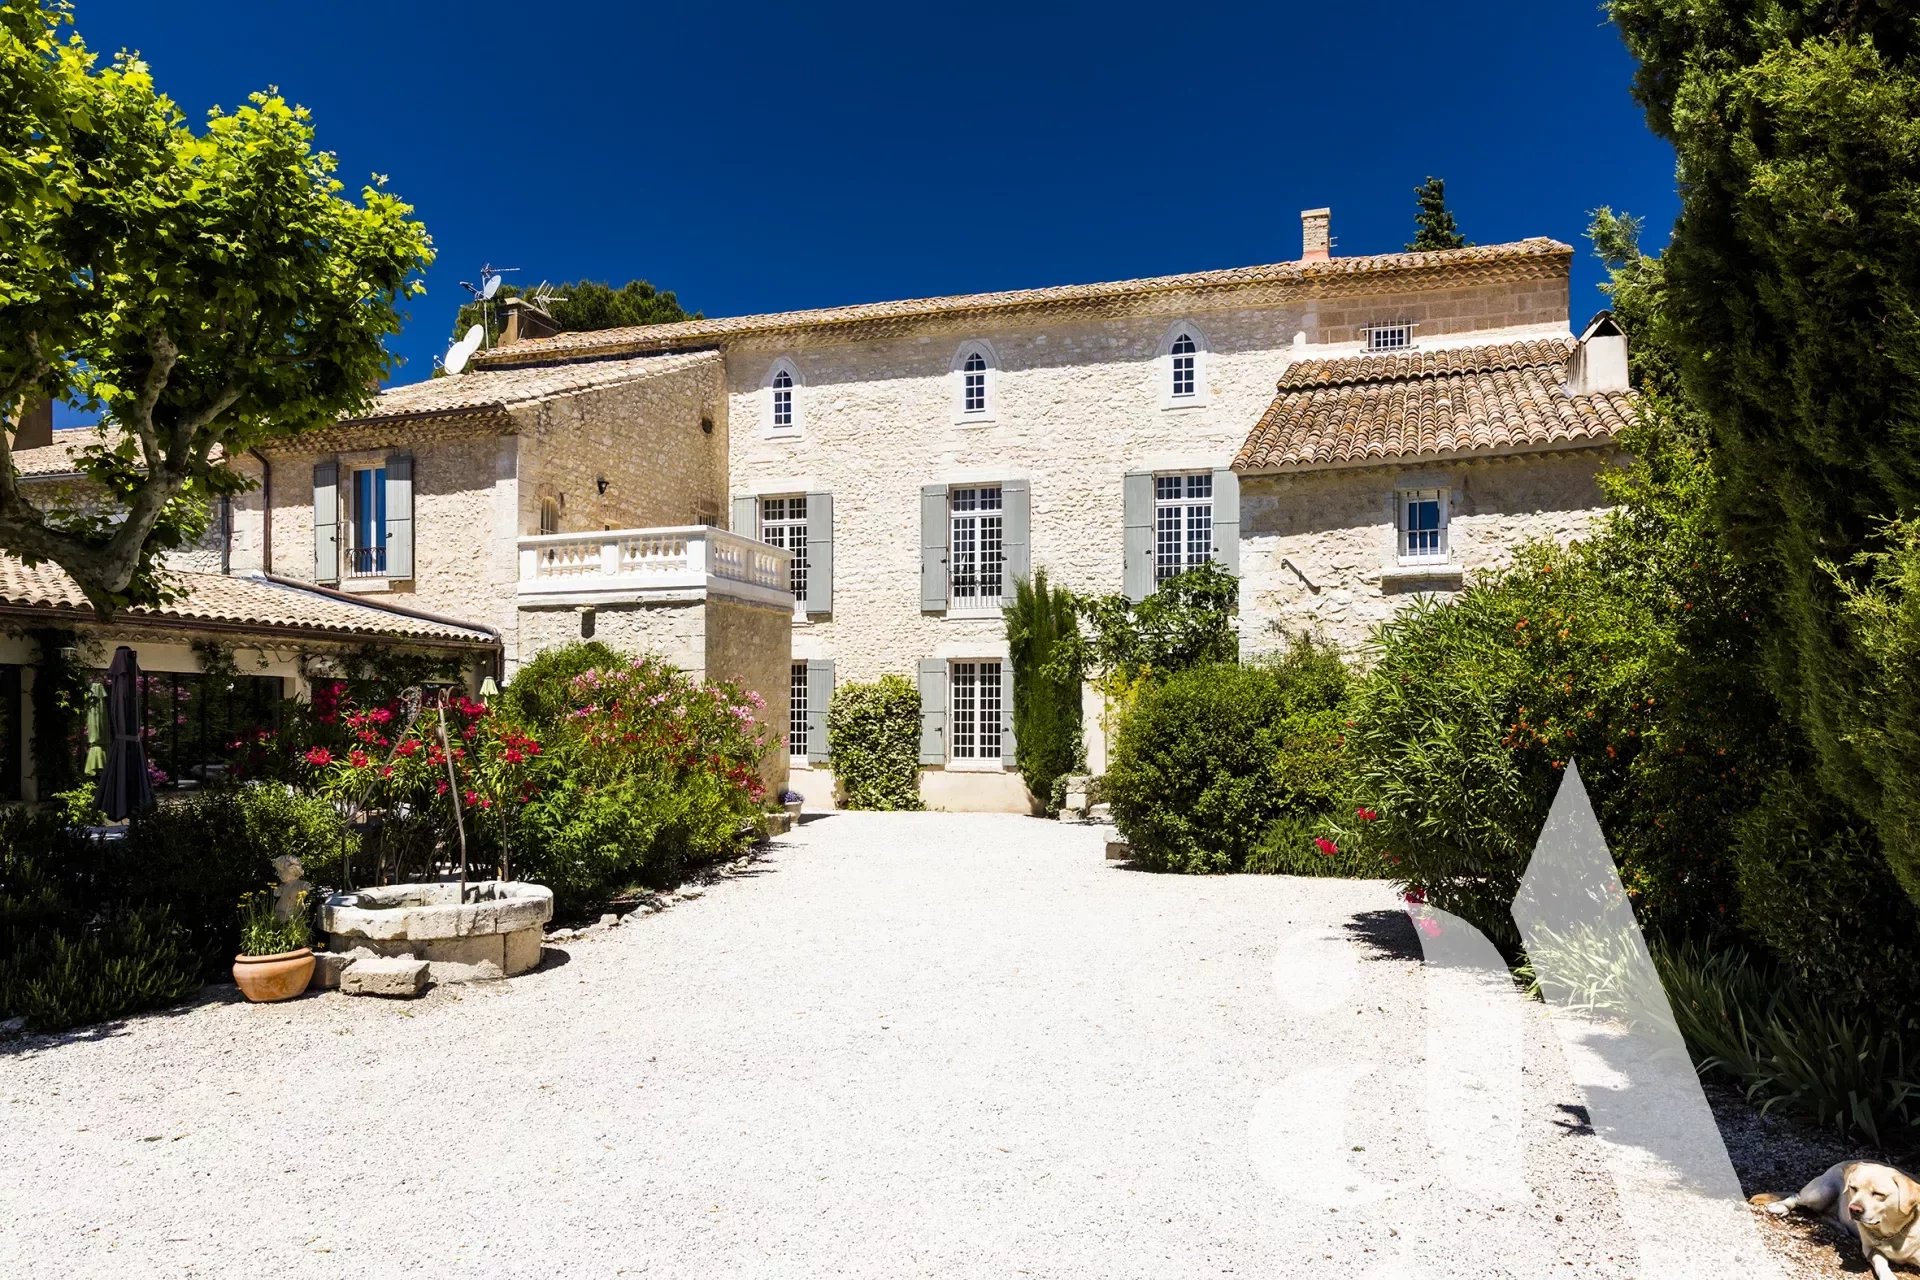 FOR SALE PROPERTY CLOSE TO ALPILLES AND AVIGNON